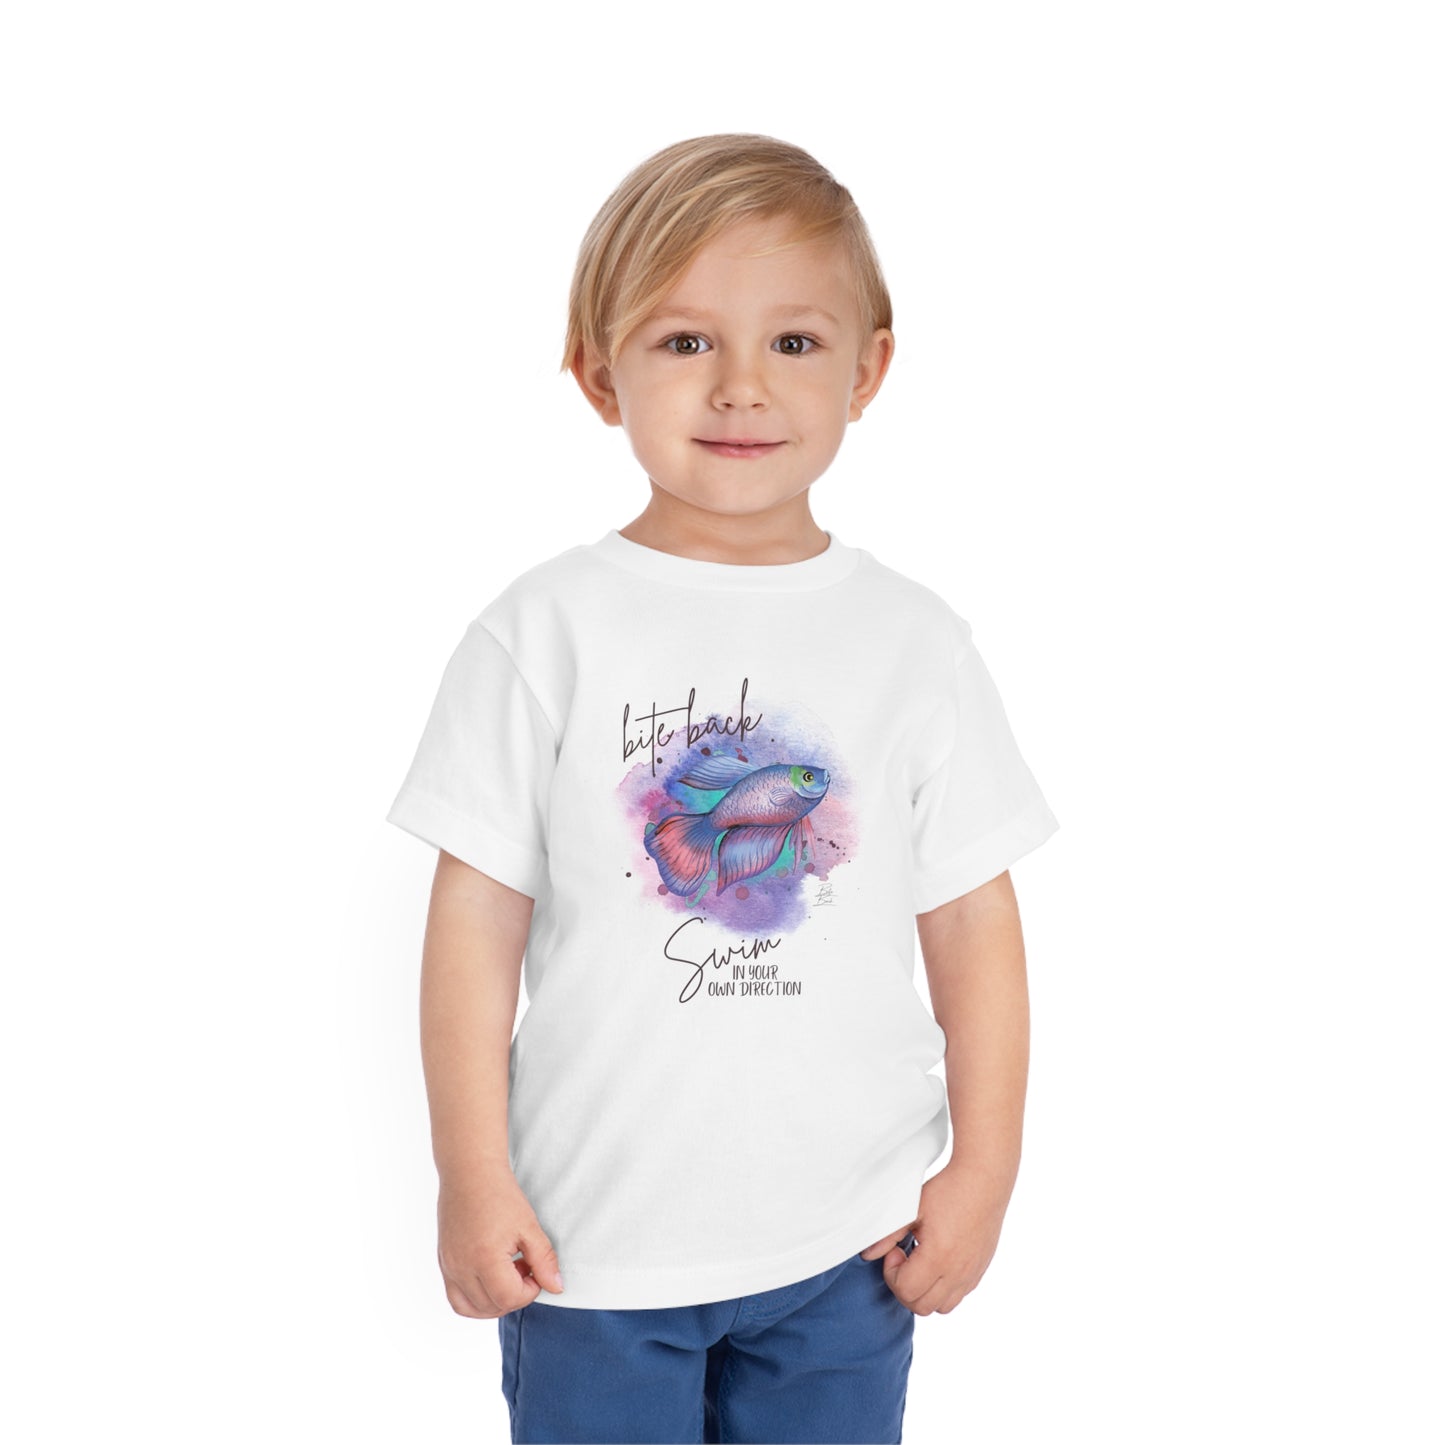 Swim in your own Direction Girls Toddler Short Sleeve Tee